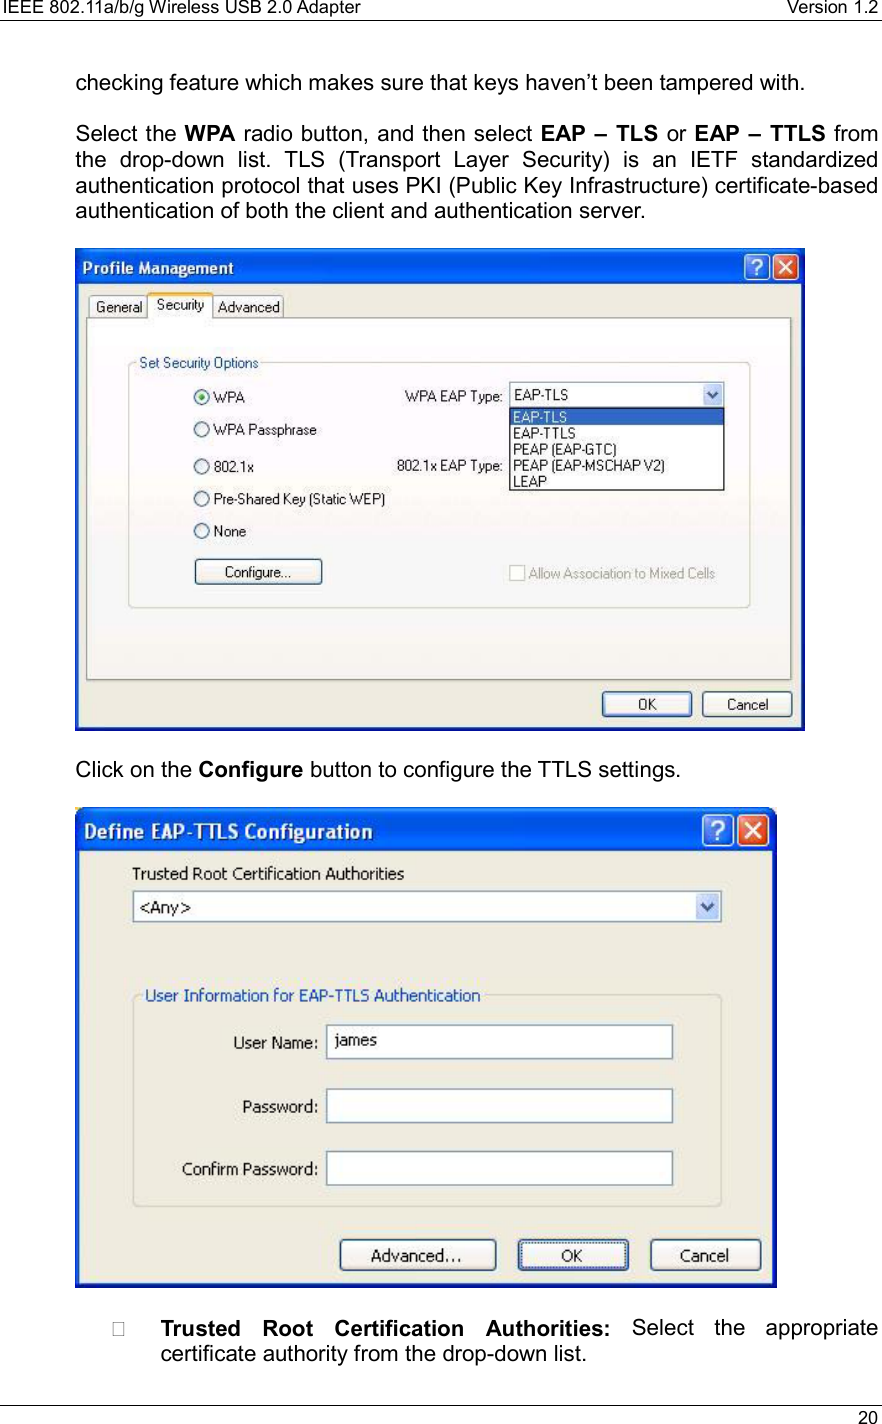 IEEE 802.11a/b/g Wireless USB 2.0 Adapter    Version 1.2   20  checking feature which makes sure that keys haven’t been tampered with.  Select the WPA radio button, and then select EAP – TLS or EAP – TTLS from the drop-down list. TLS (Transport Layer Security) is an IETF standardized authentication protocol that uses PKI (Public Key Infrastructure) certificate-based authentication of both the client and authentication server.    Click on the Configure button to configure the TTLS settings.      Trusted Root Certification Authorities: Select the appropriate certificate authority from the drop-down list.   